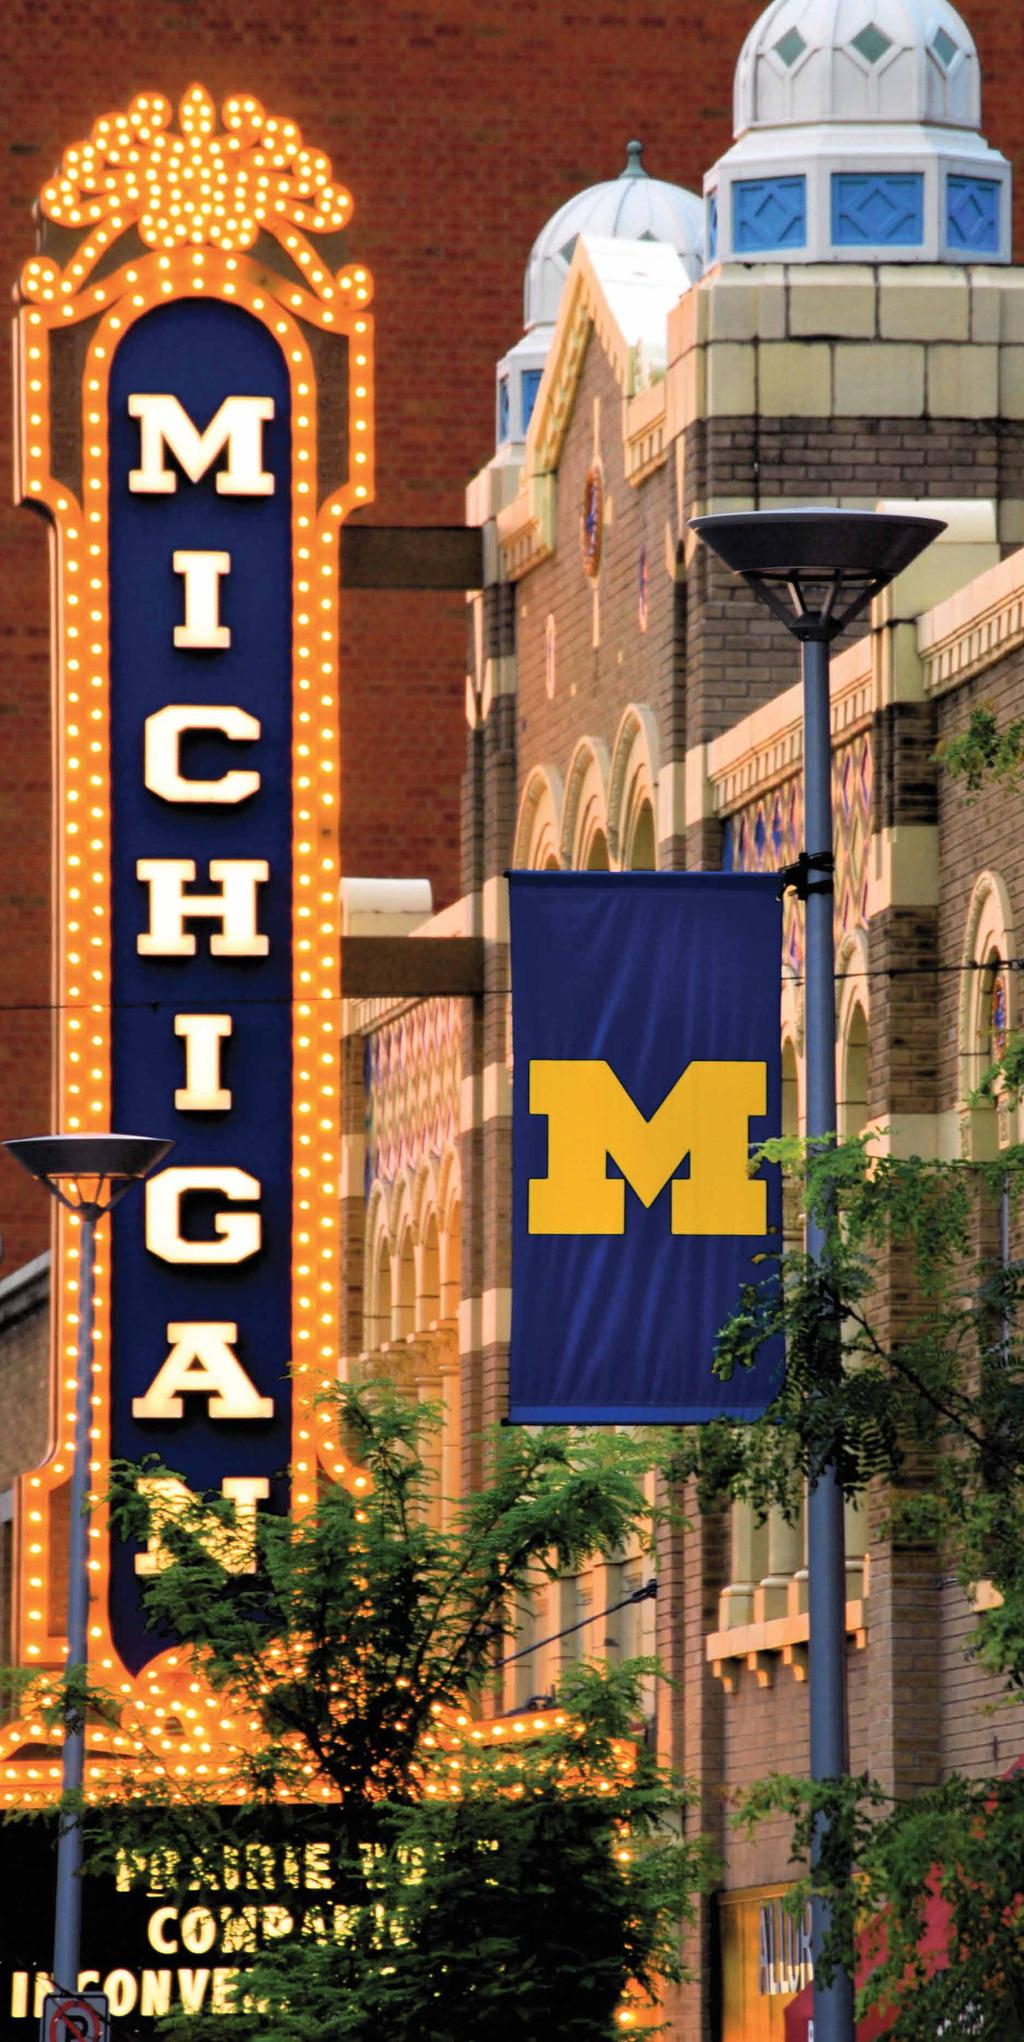 WHY TRAIN AT MICHIGAN At the Michigan Medicine Department of Surgery, we re known nationally for excellence in guiding the next generation of surgeons.